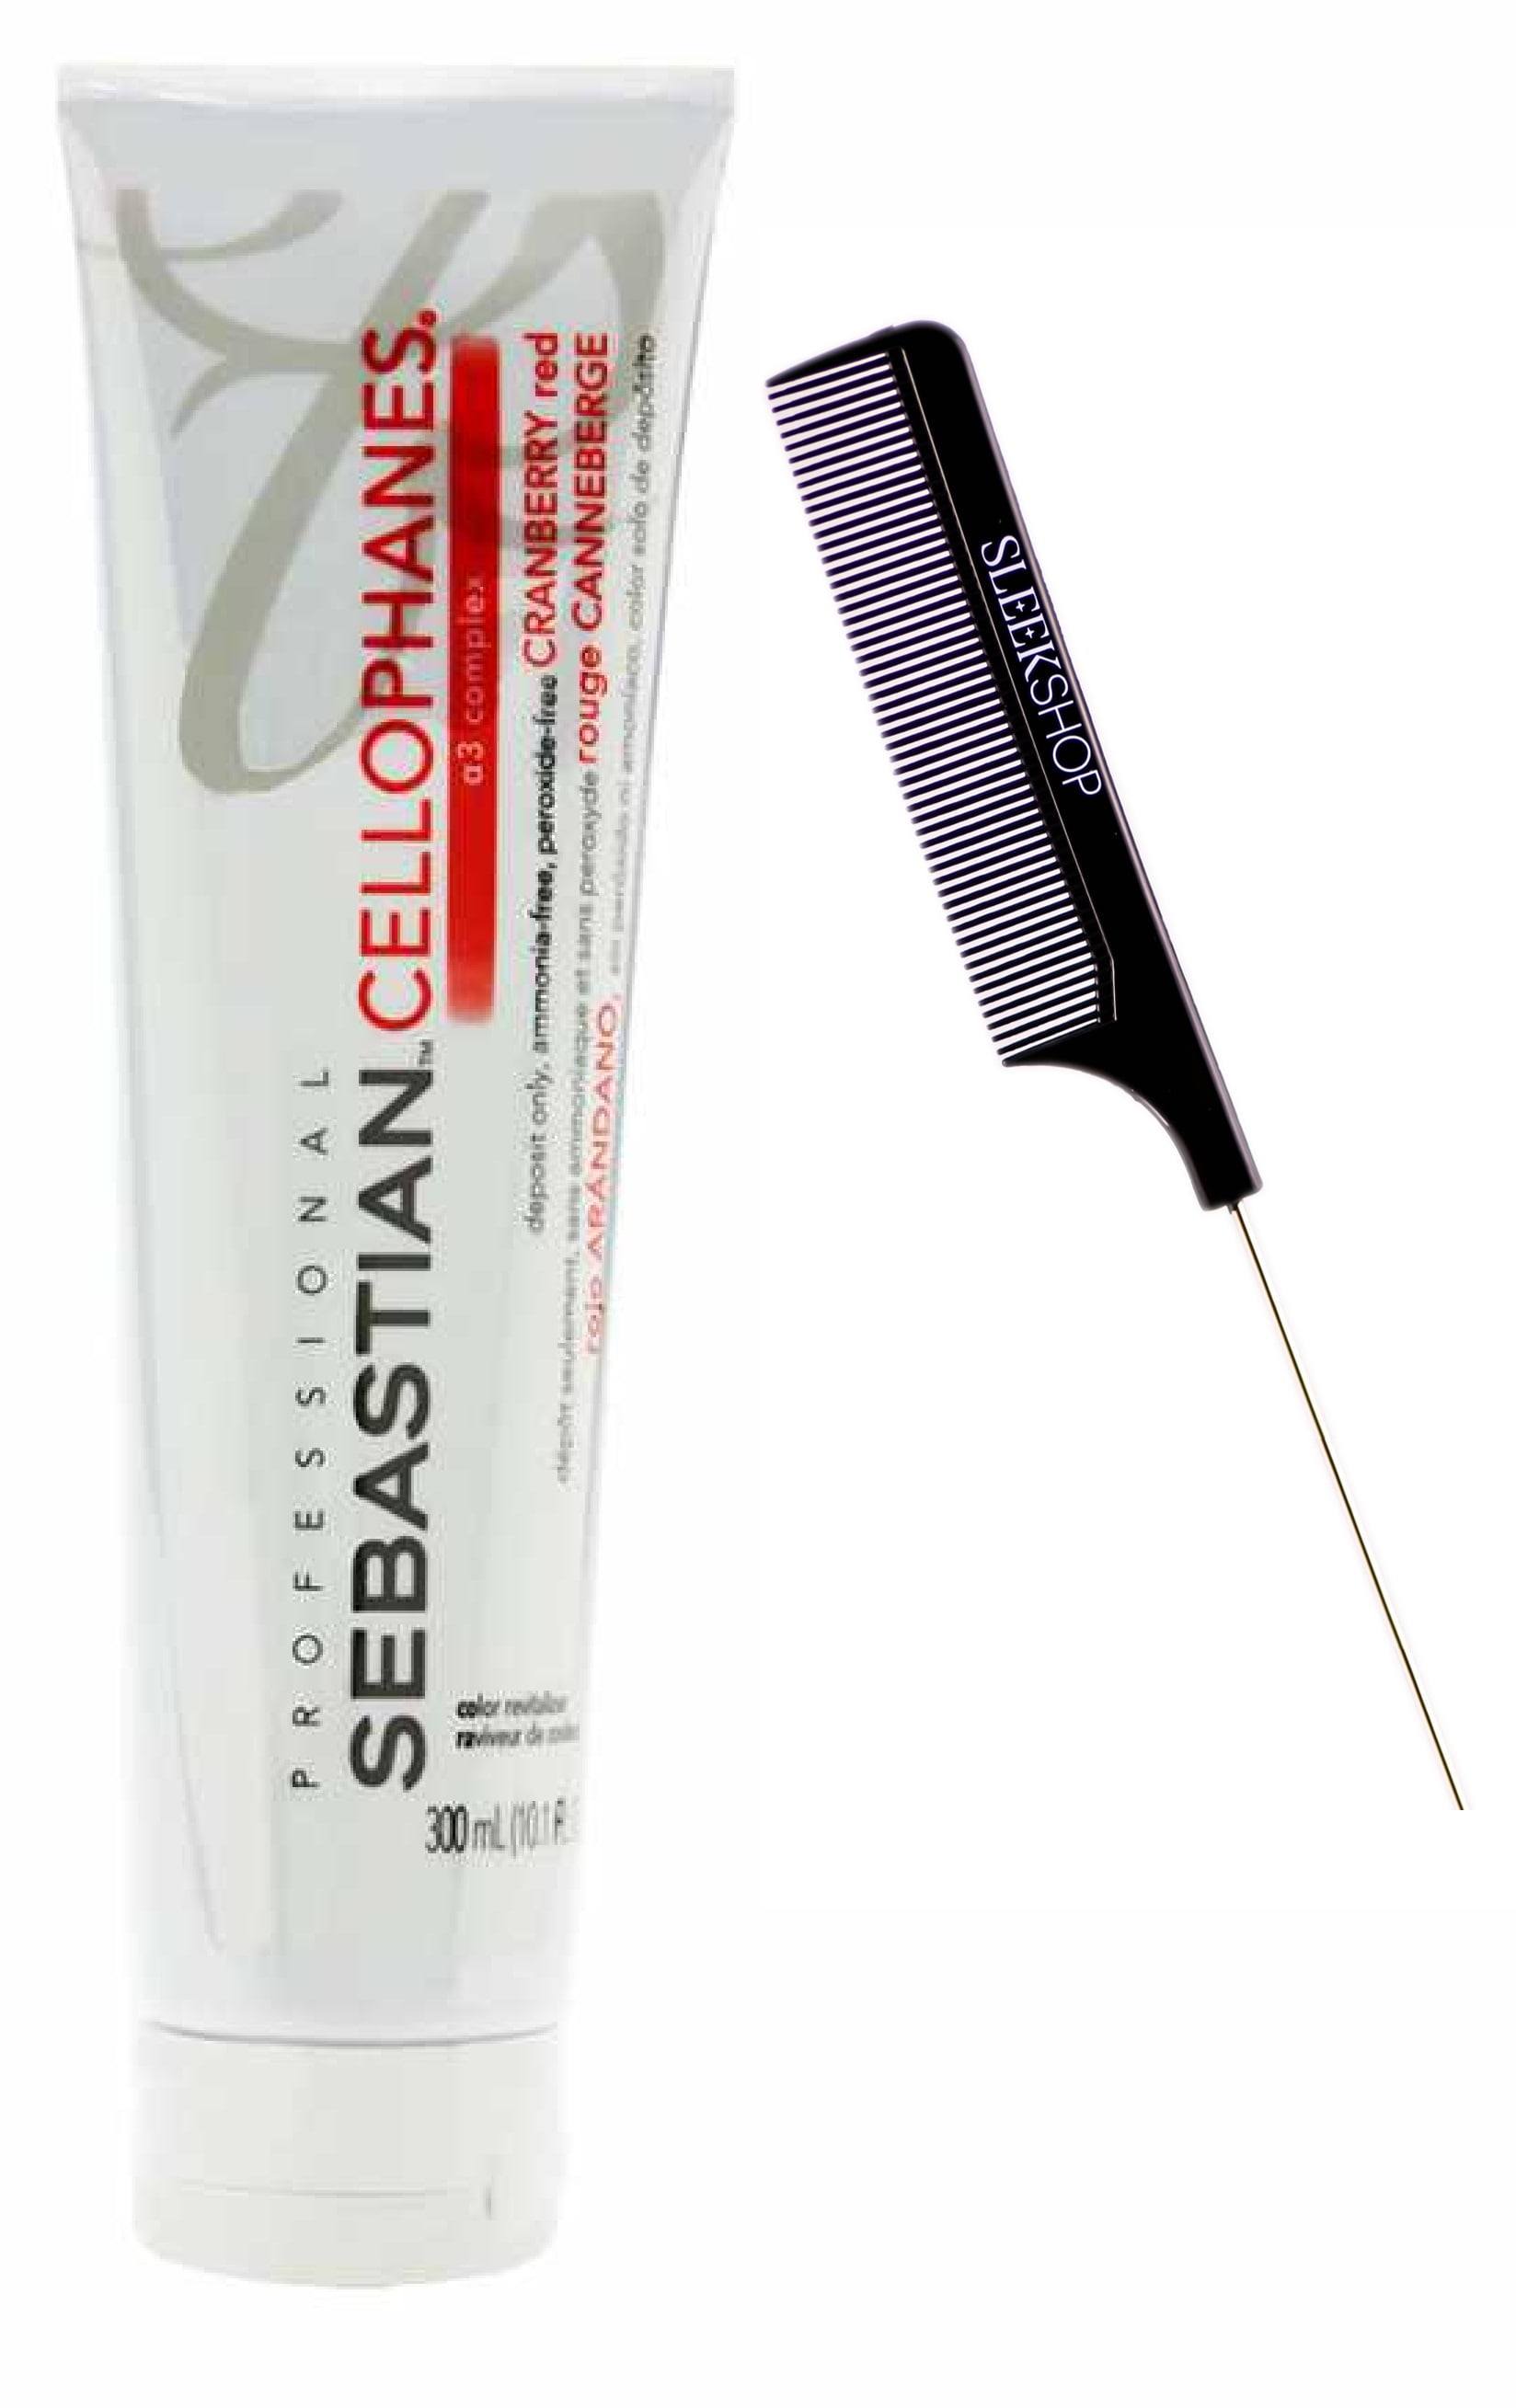 Sebastian CELLOPHANES, Hair Color Revitalizer A3 Complex Conditioner,  Deposit Only, Ammonia-Free, Peroxide-Free (w/ Sleek Comb) Sebastion  Haircolor Dye (CHOCOLATE BROWN  oz / 300 ml) 